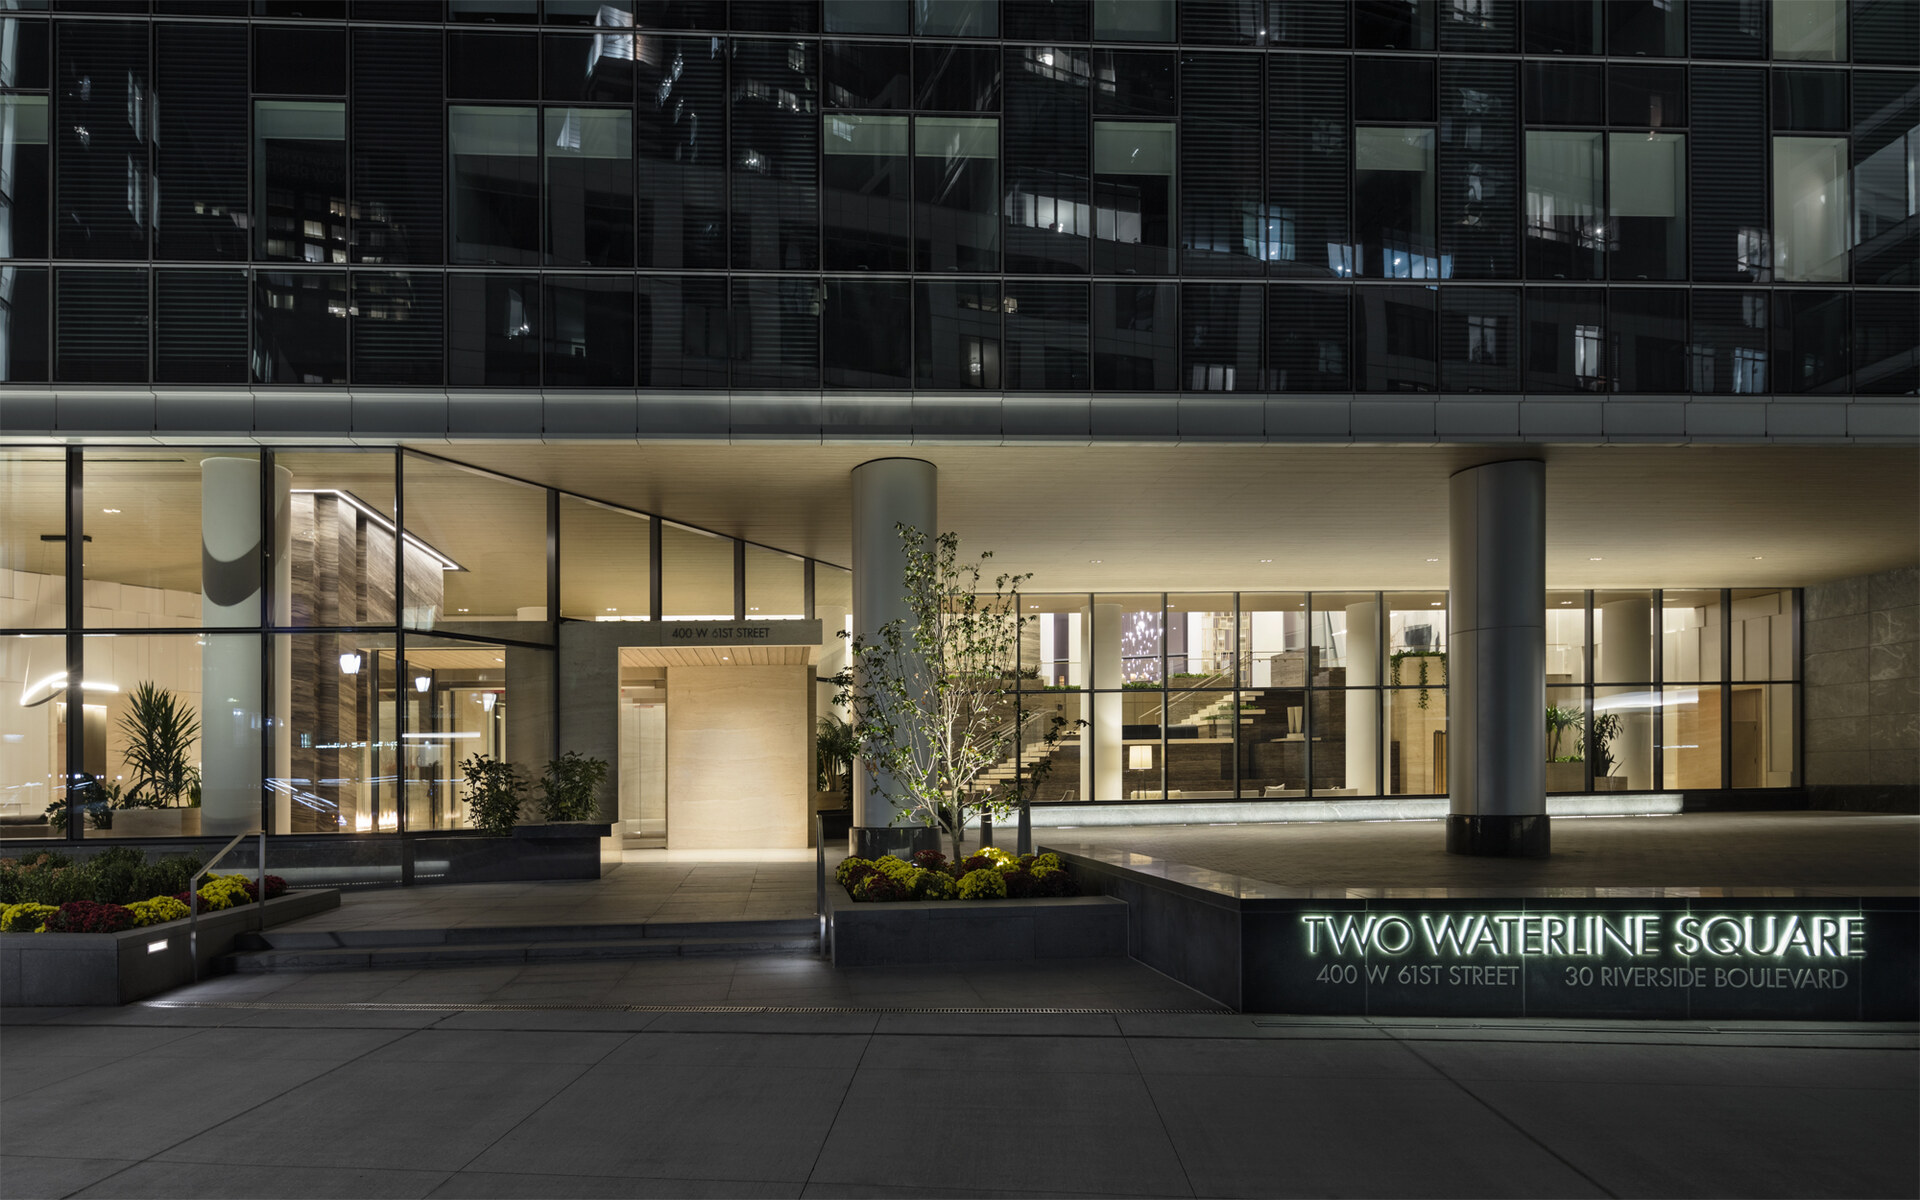 Modern urban elegance: the sleek exterior of two waterline square at night, showcasing its sophisticated lighting, well-manicured landscaping, and inviting entrance.